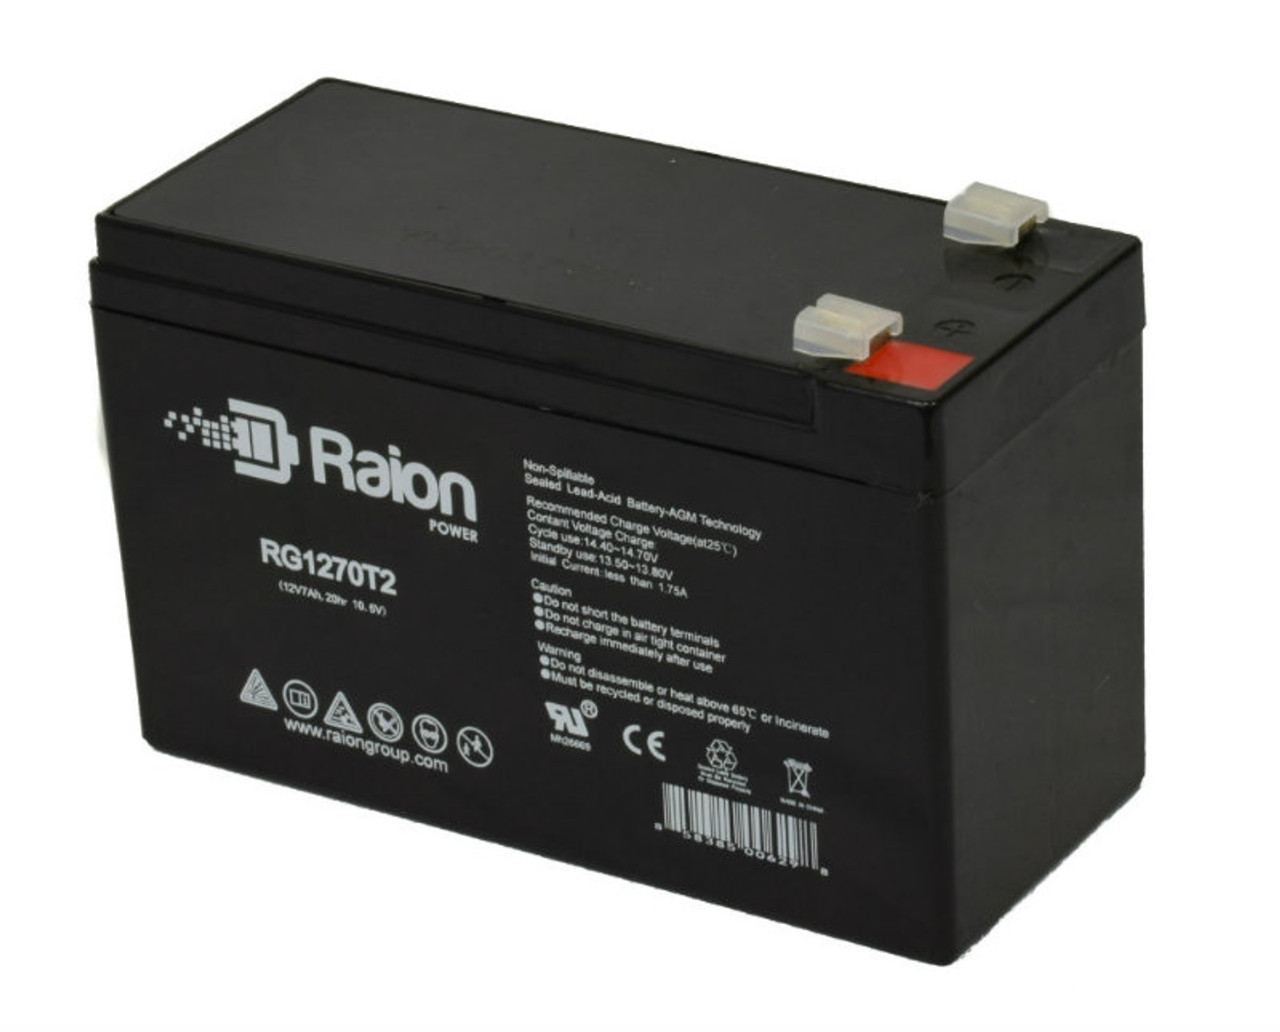 Raion Power RG1270T1 12V 7Ah Non-Spillable Replacement Battery for Sunnyway SW1234W